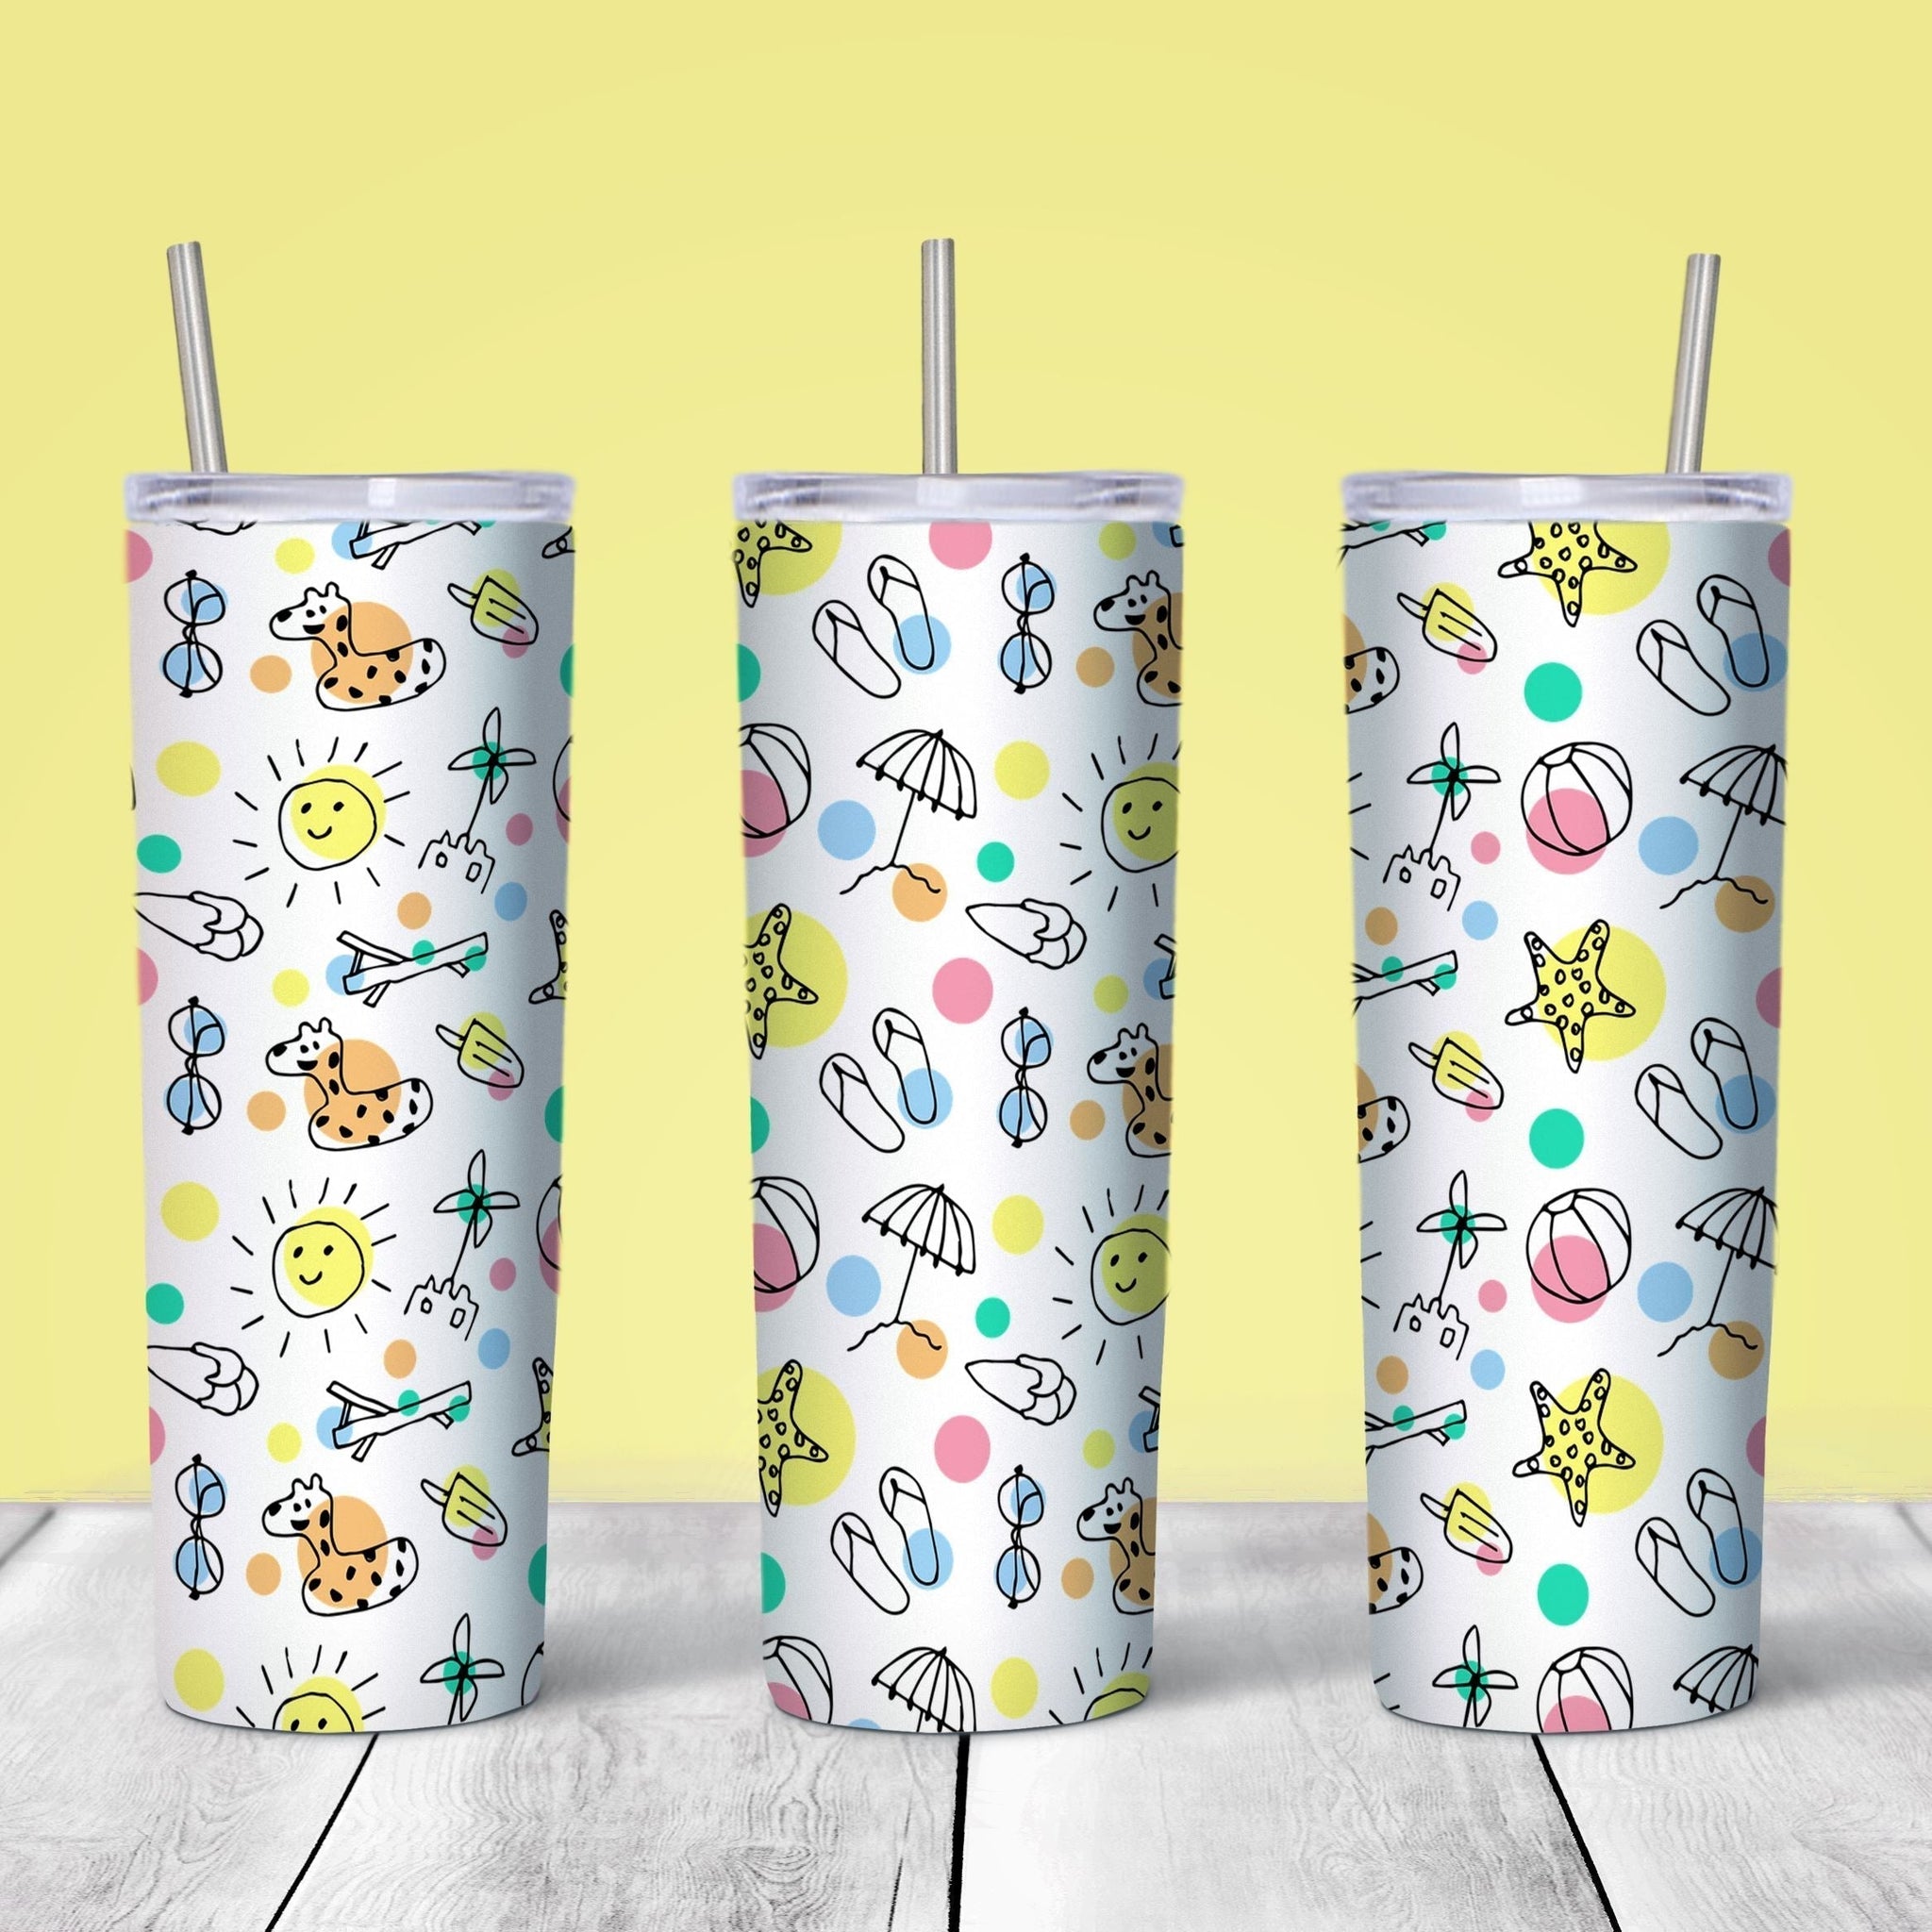 Pack of 20) 20oz or 30oz Sublimation White Car Tumbler – Sayers & Co.